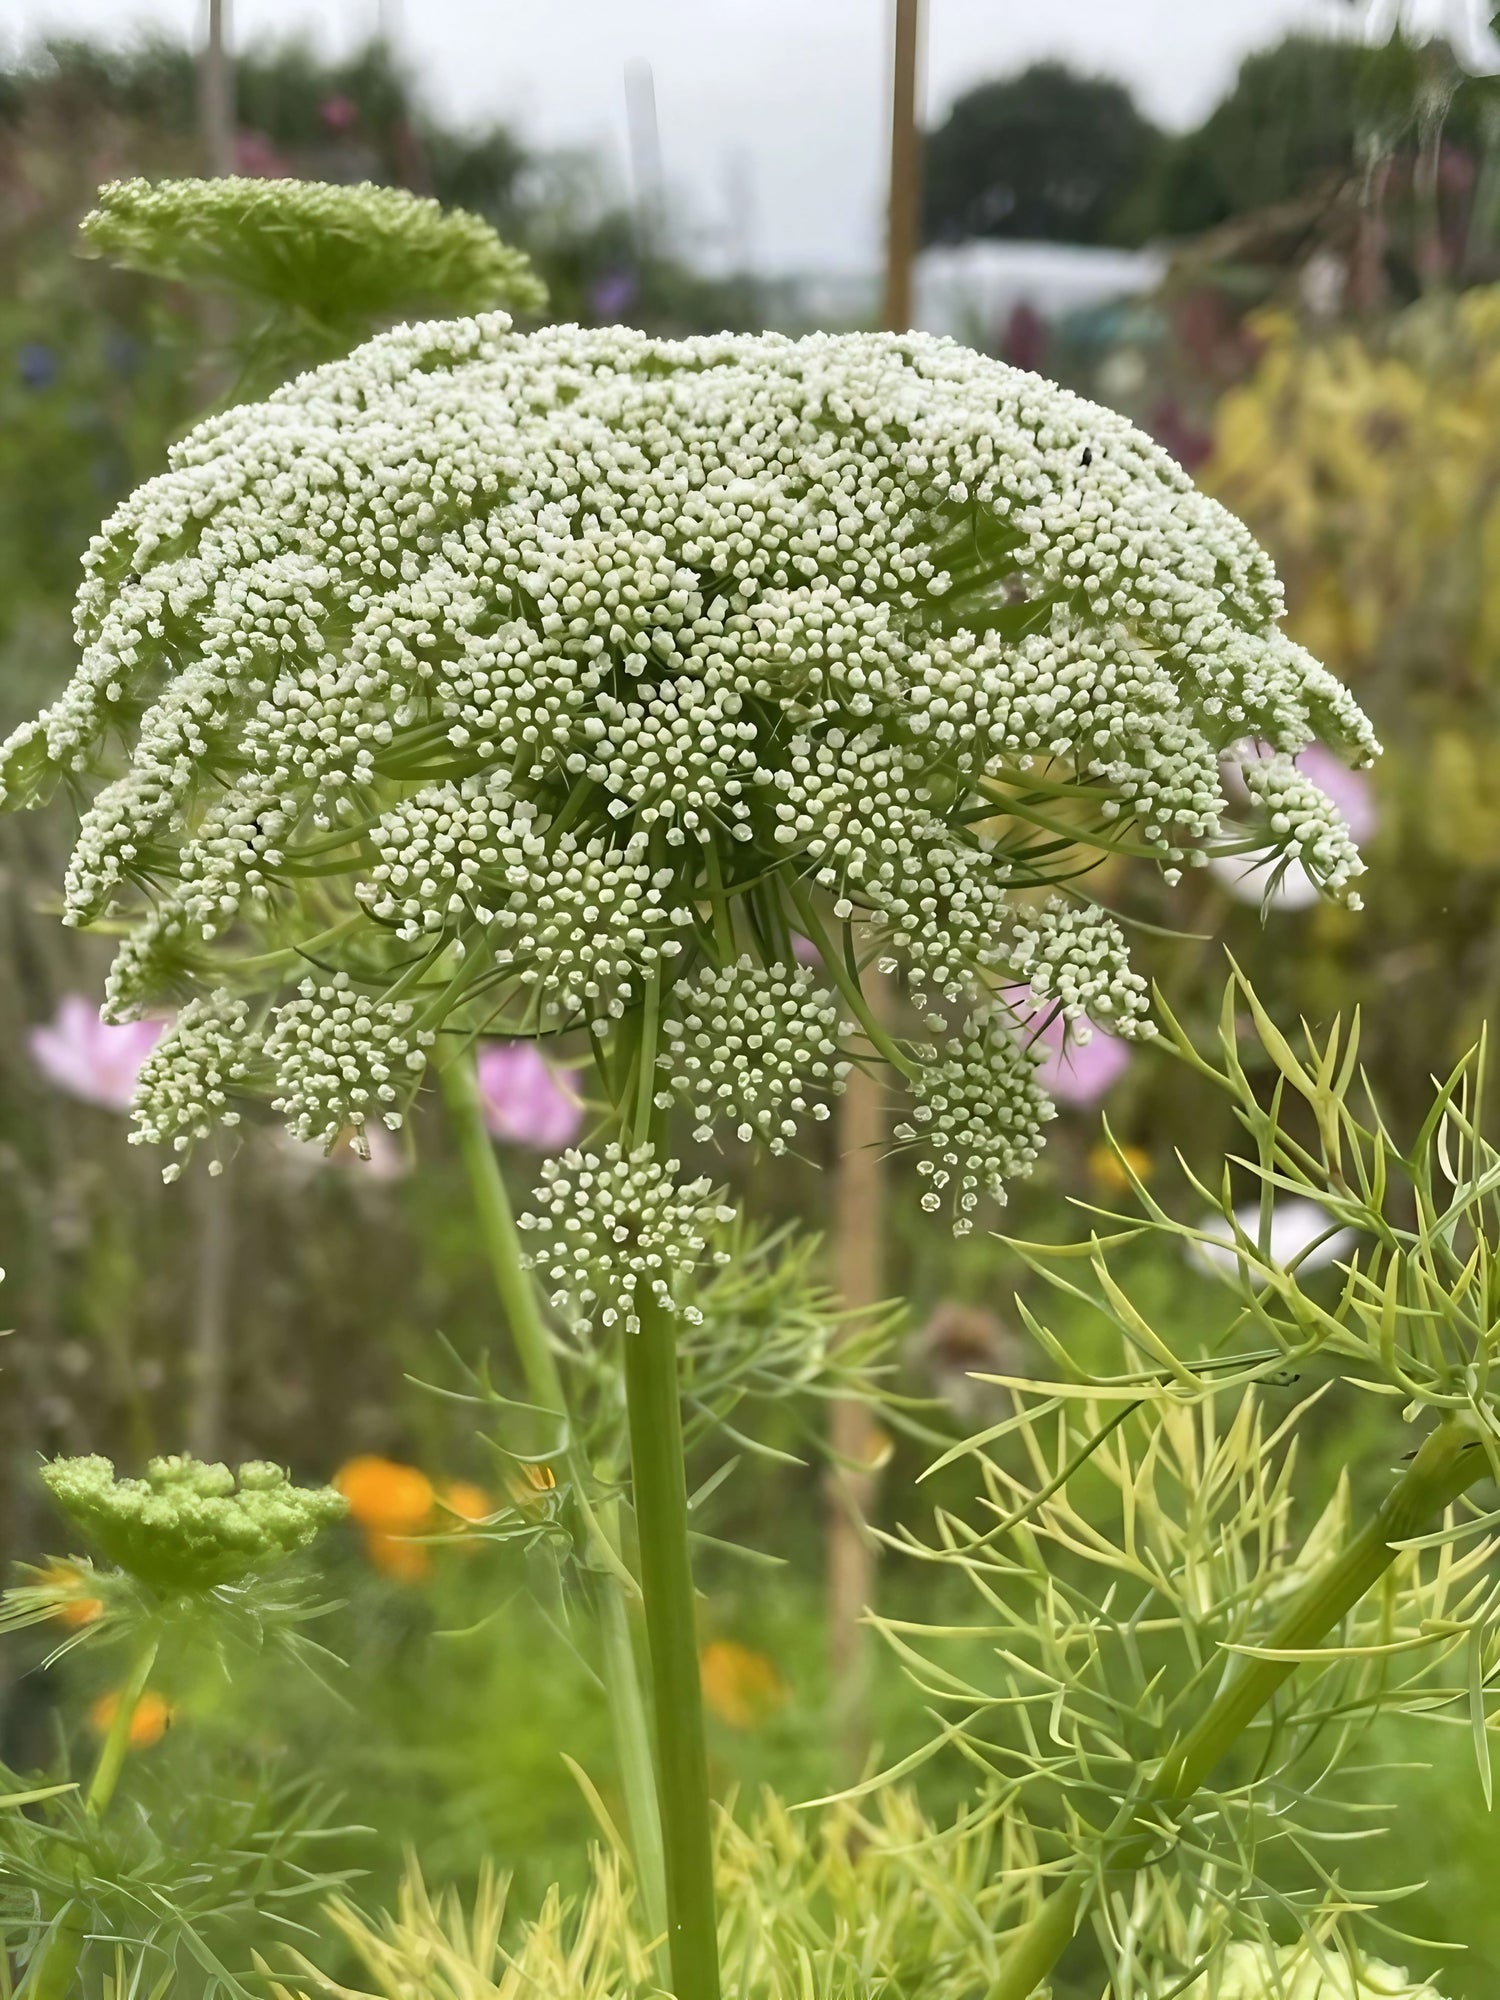 Ammi Visnaga plant showcasing its large clusters of white blooms